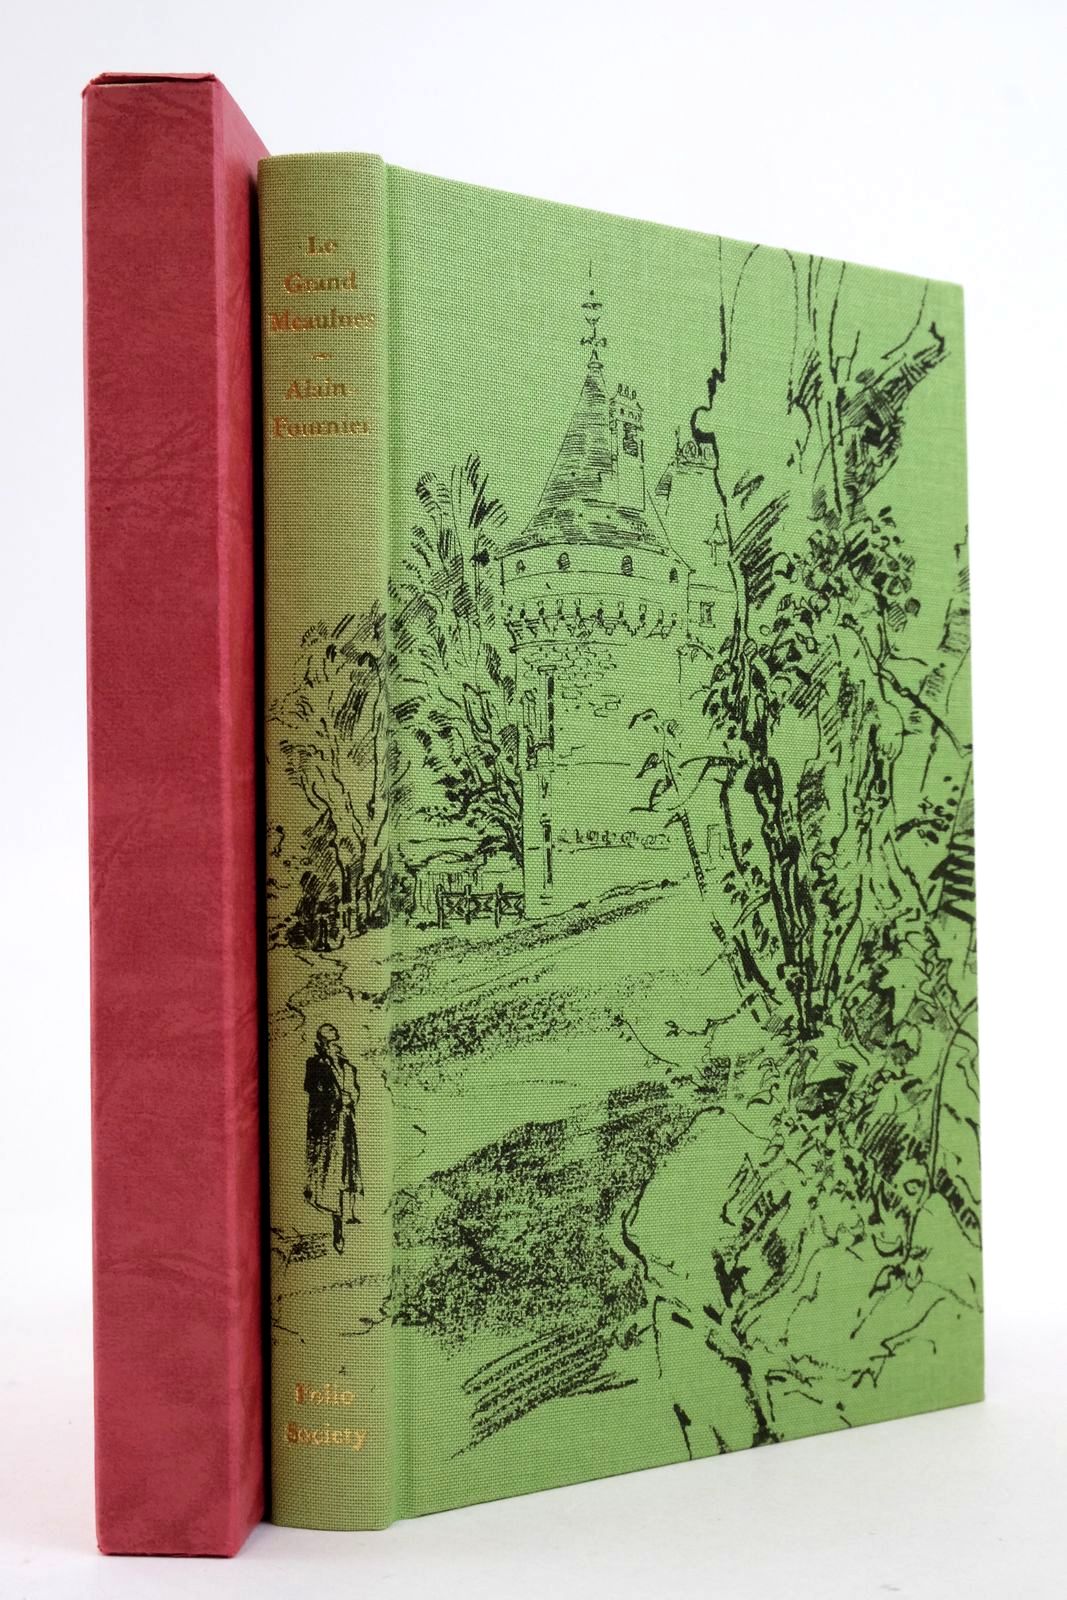 Photo of LE GRAND MEAULNES: THE LAND OF LOST CONTENT written by Alain-Fournier, Henri Vivian, Katharine Garland, Patrick illustrated by Ribbons, Ian published by Folio Society (STOCK CODE: 2138285)  for sale by Stella & Rose's Books